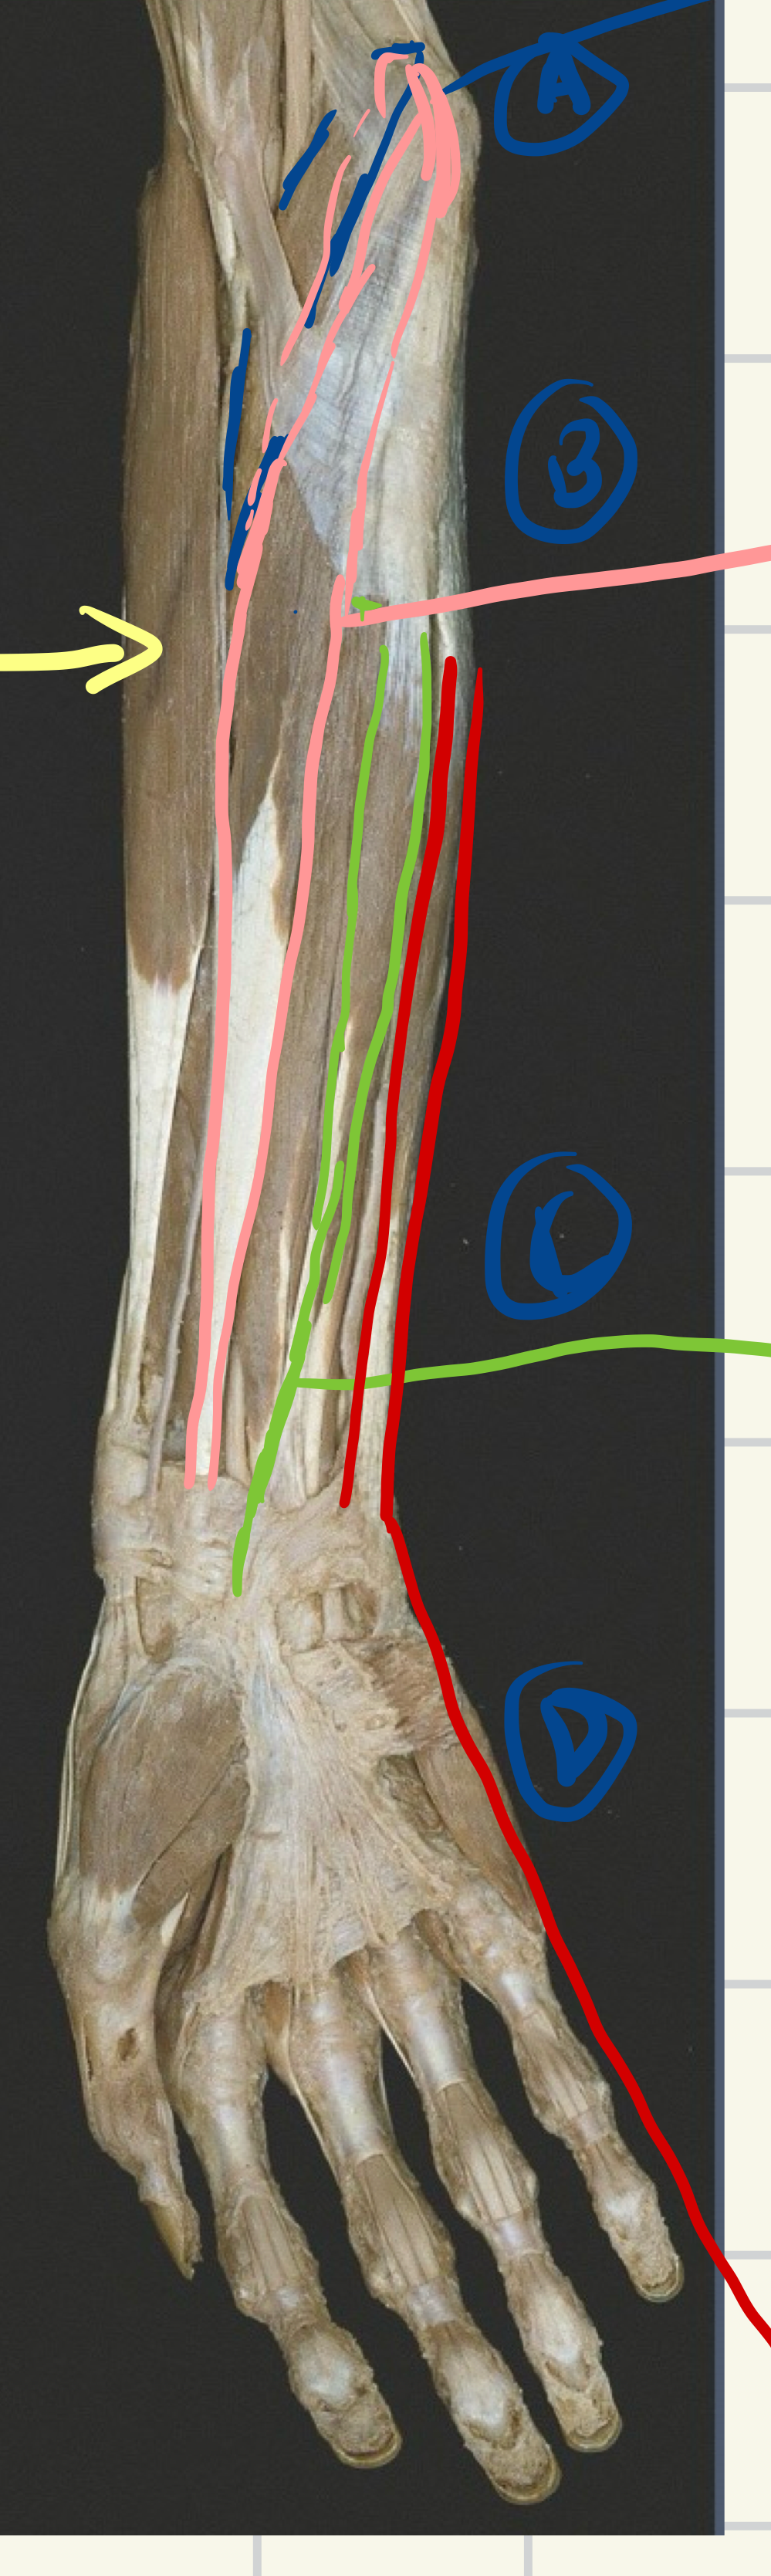 <p>What muscle is the yellow arrow pointing at ? (Origin, insertion, action, innervation)</p>